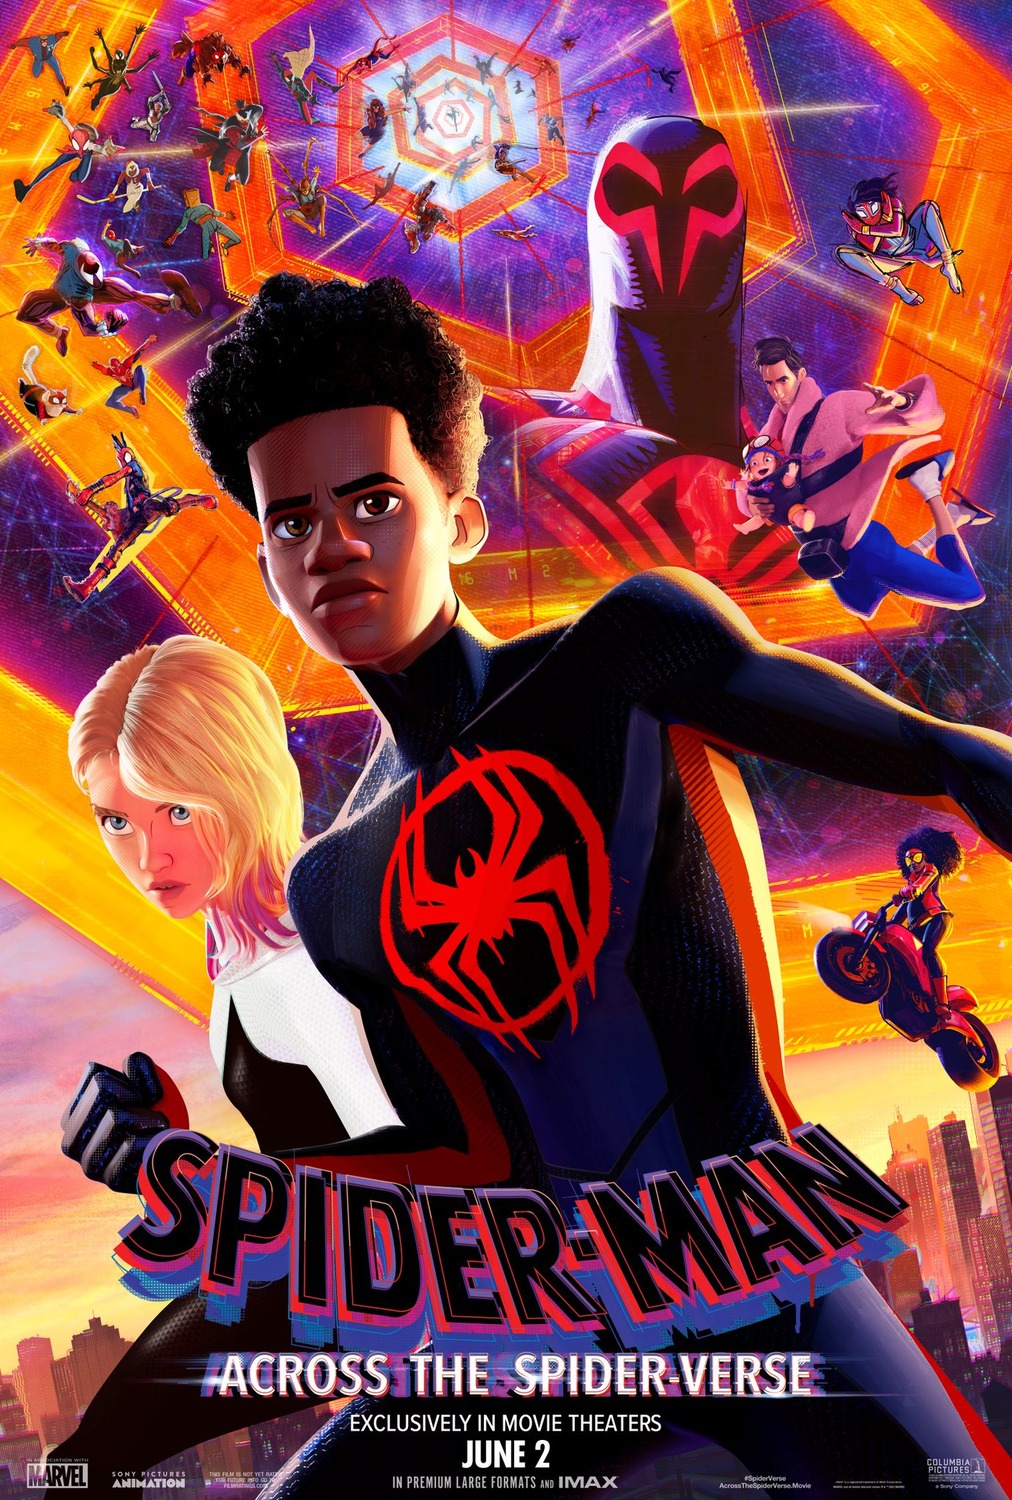 christian movie review spider man across the spider verse